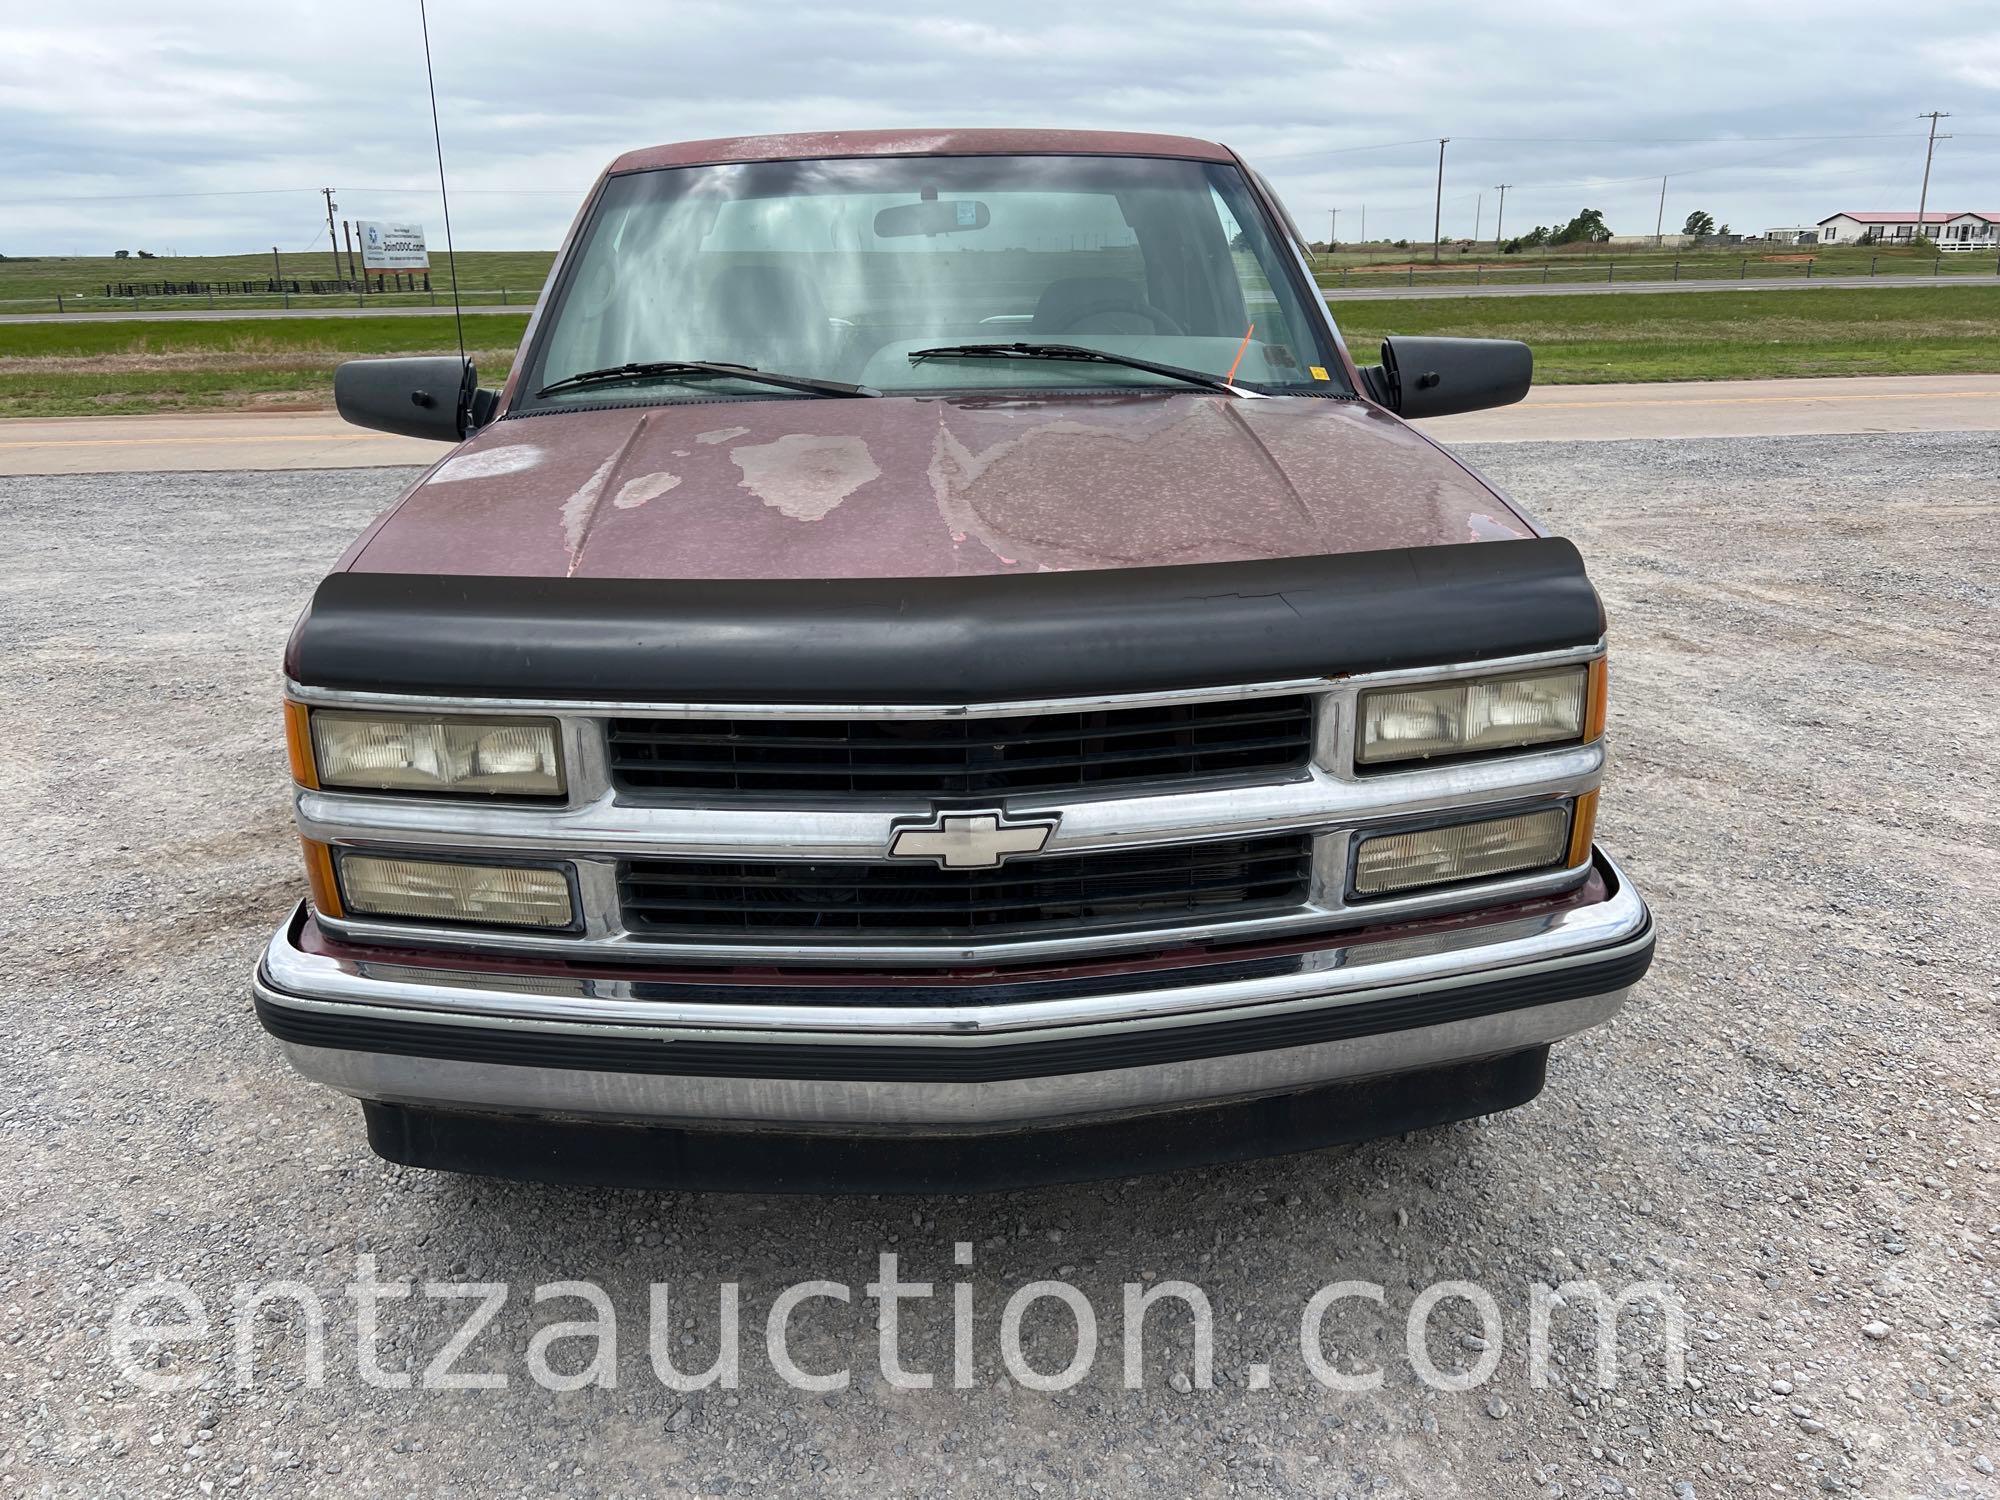 1995 CHEVY 2500 PICKUP, EXT. CAB, 454 GAS ENG.,